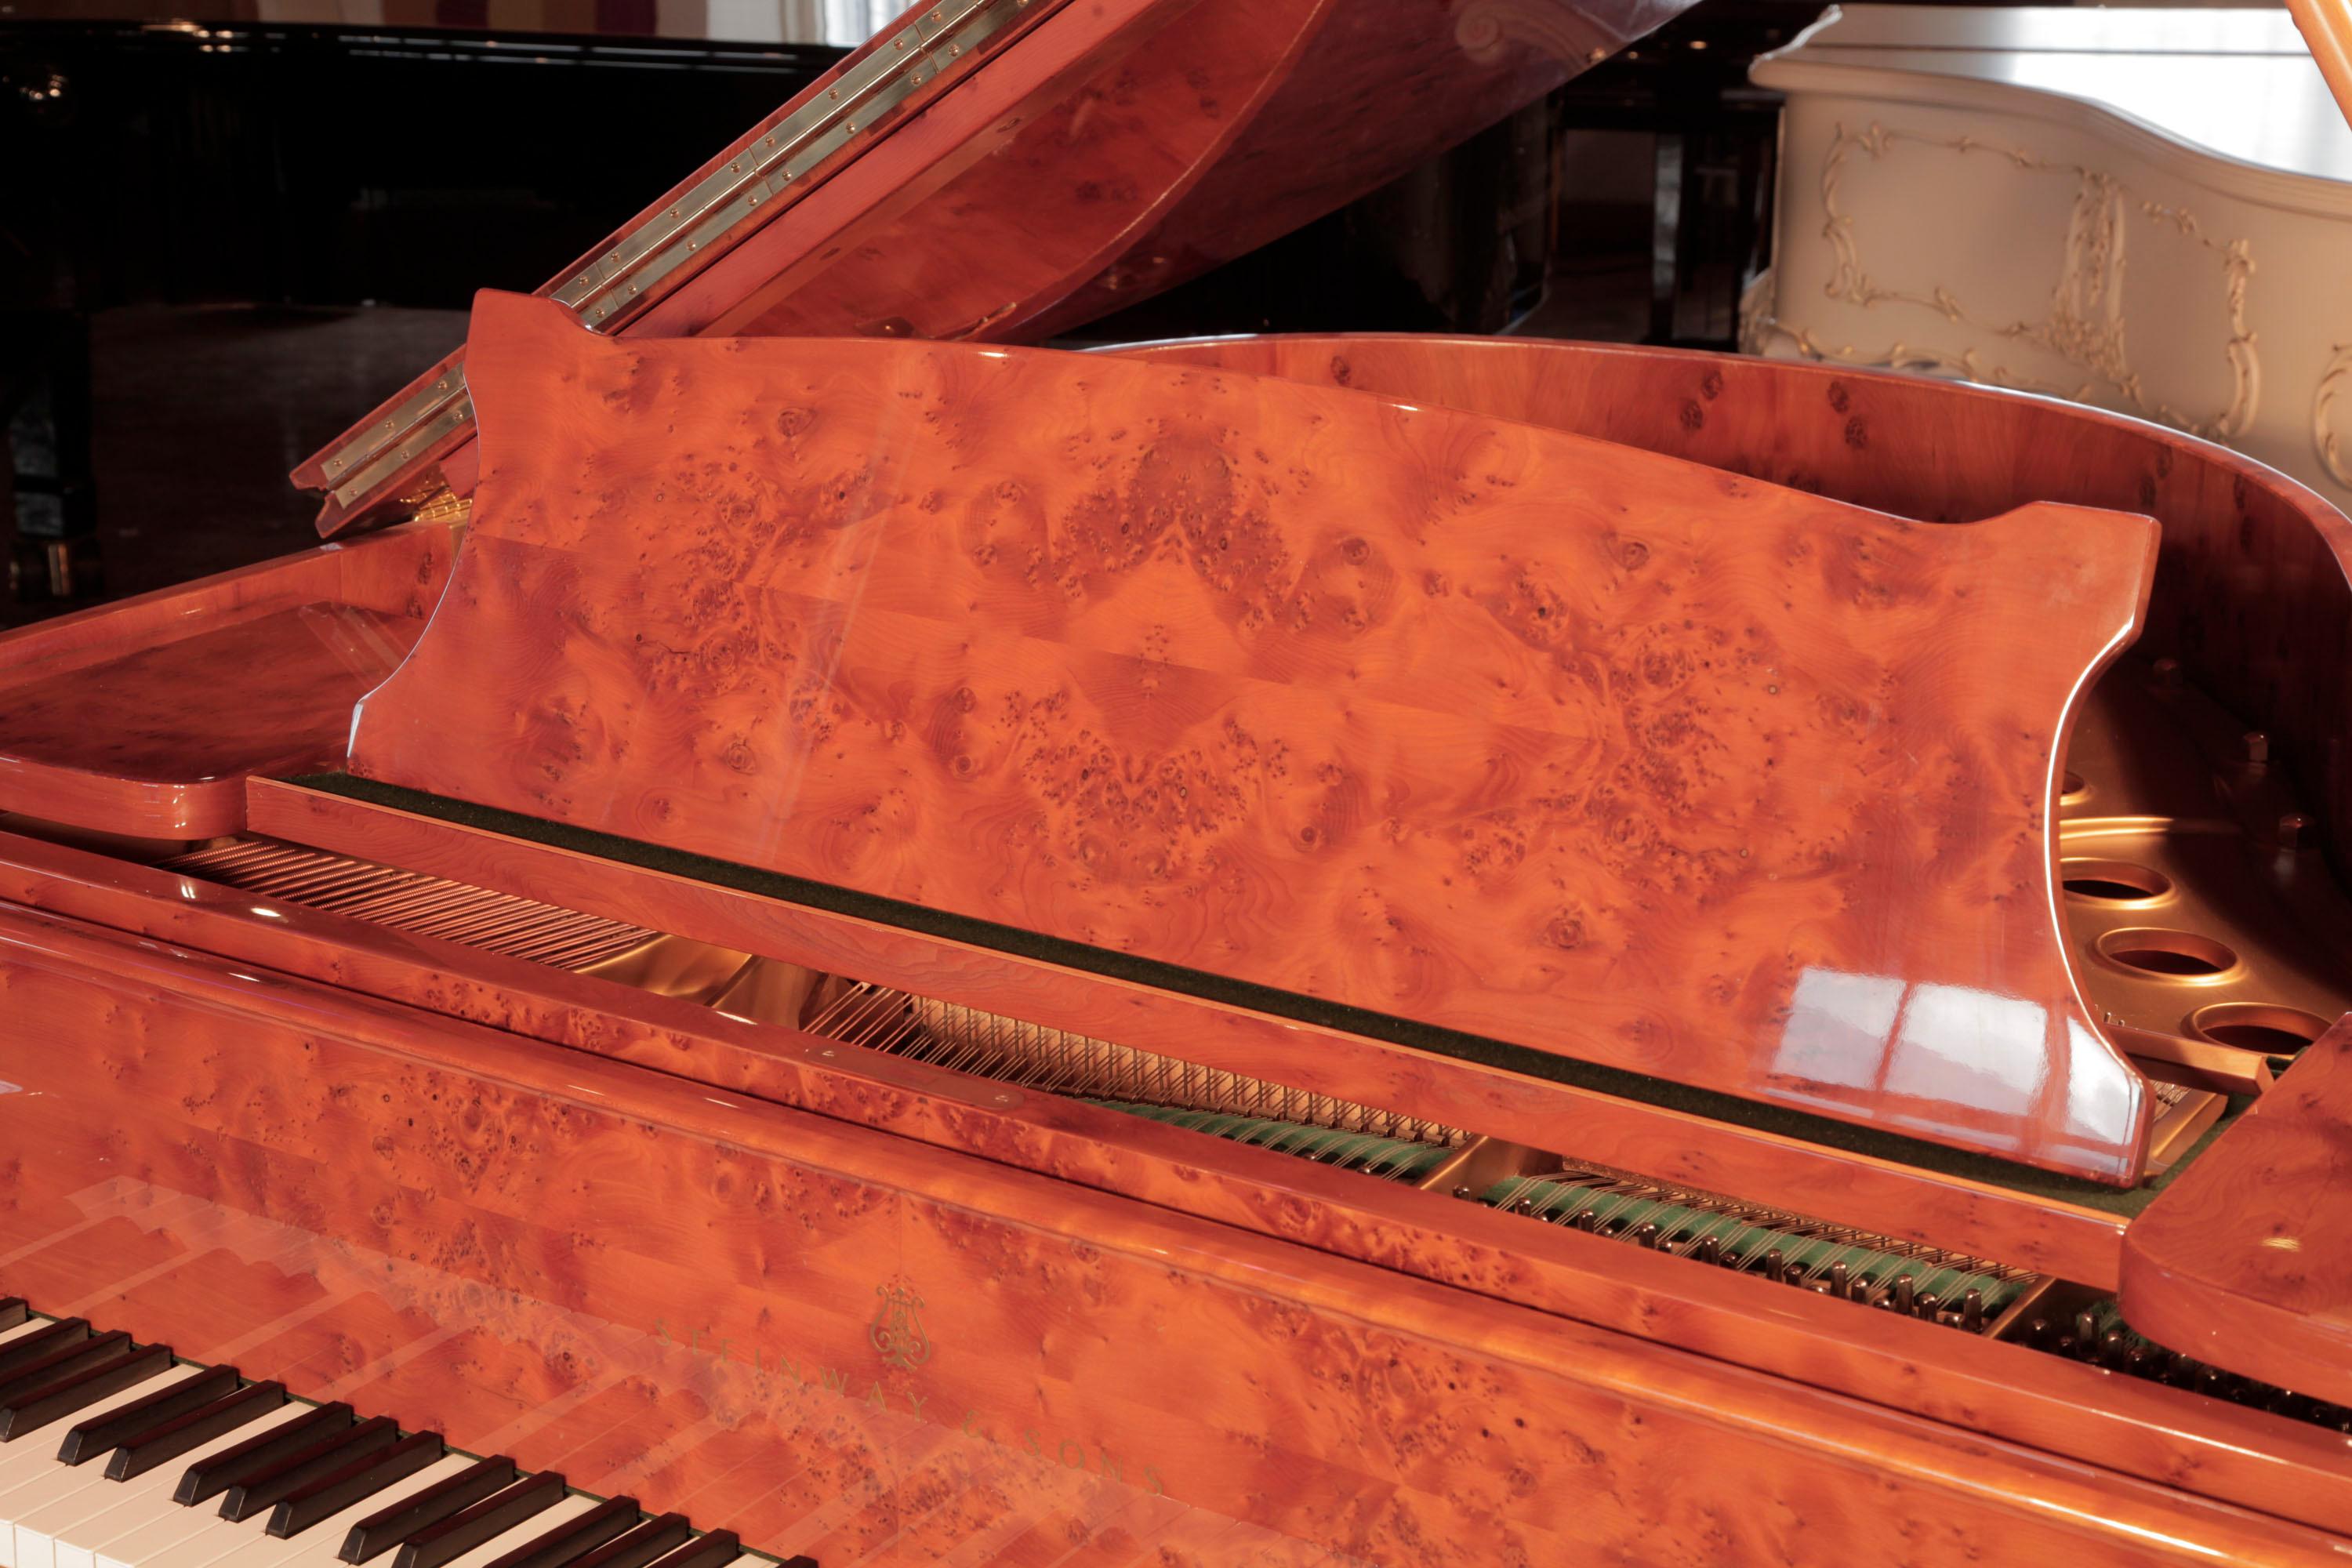 Crown Jewel Collection, 1991, Steinway Model S baby grand piano with a gloss yew case and spade legs.

The Steinway Crown Jewel Collection is an exclusive series of Steinway piano models that feature the highest quality veneers. The Steinway Crown